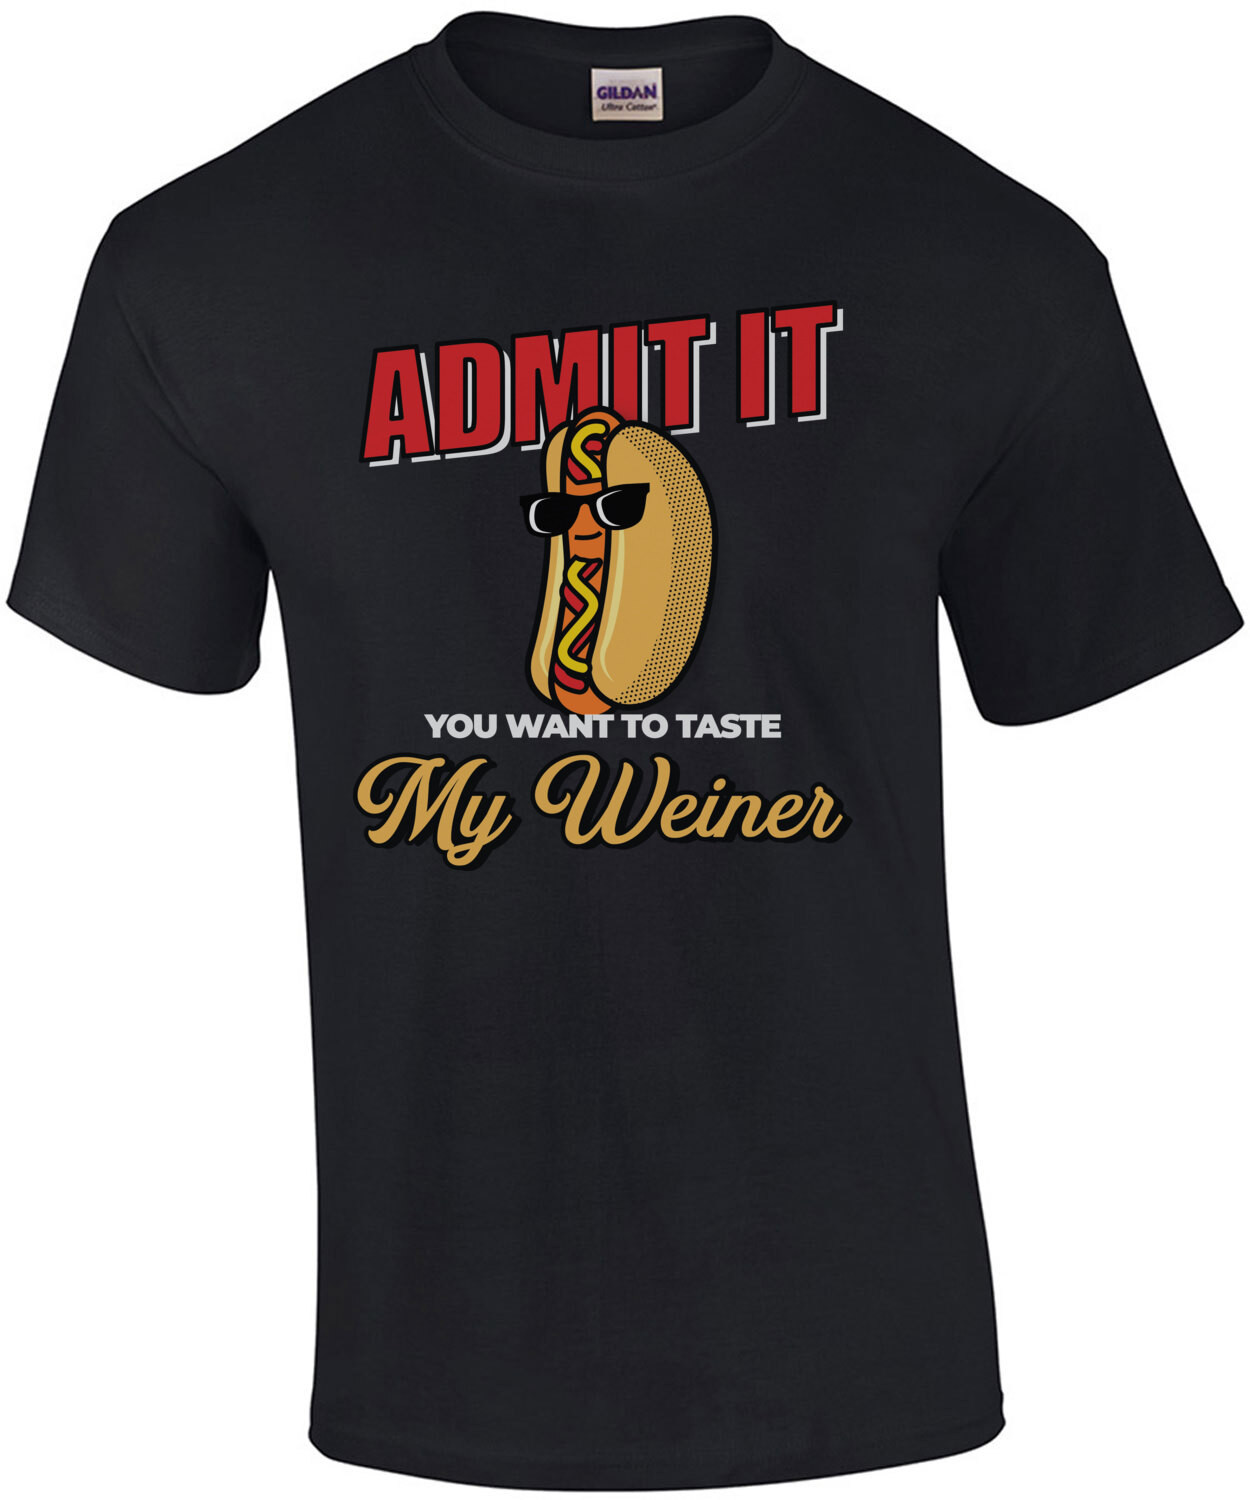 Admit it you want to taste my weiner - funny sexual t-shirt